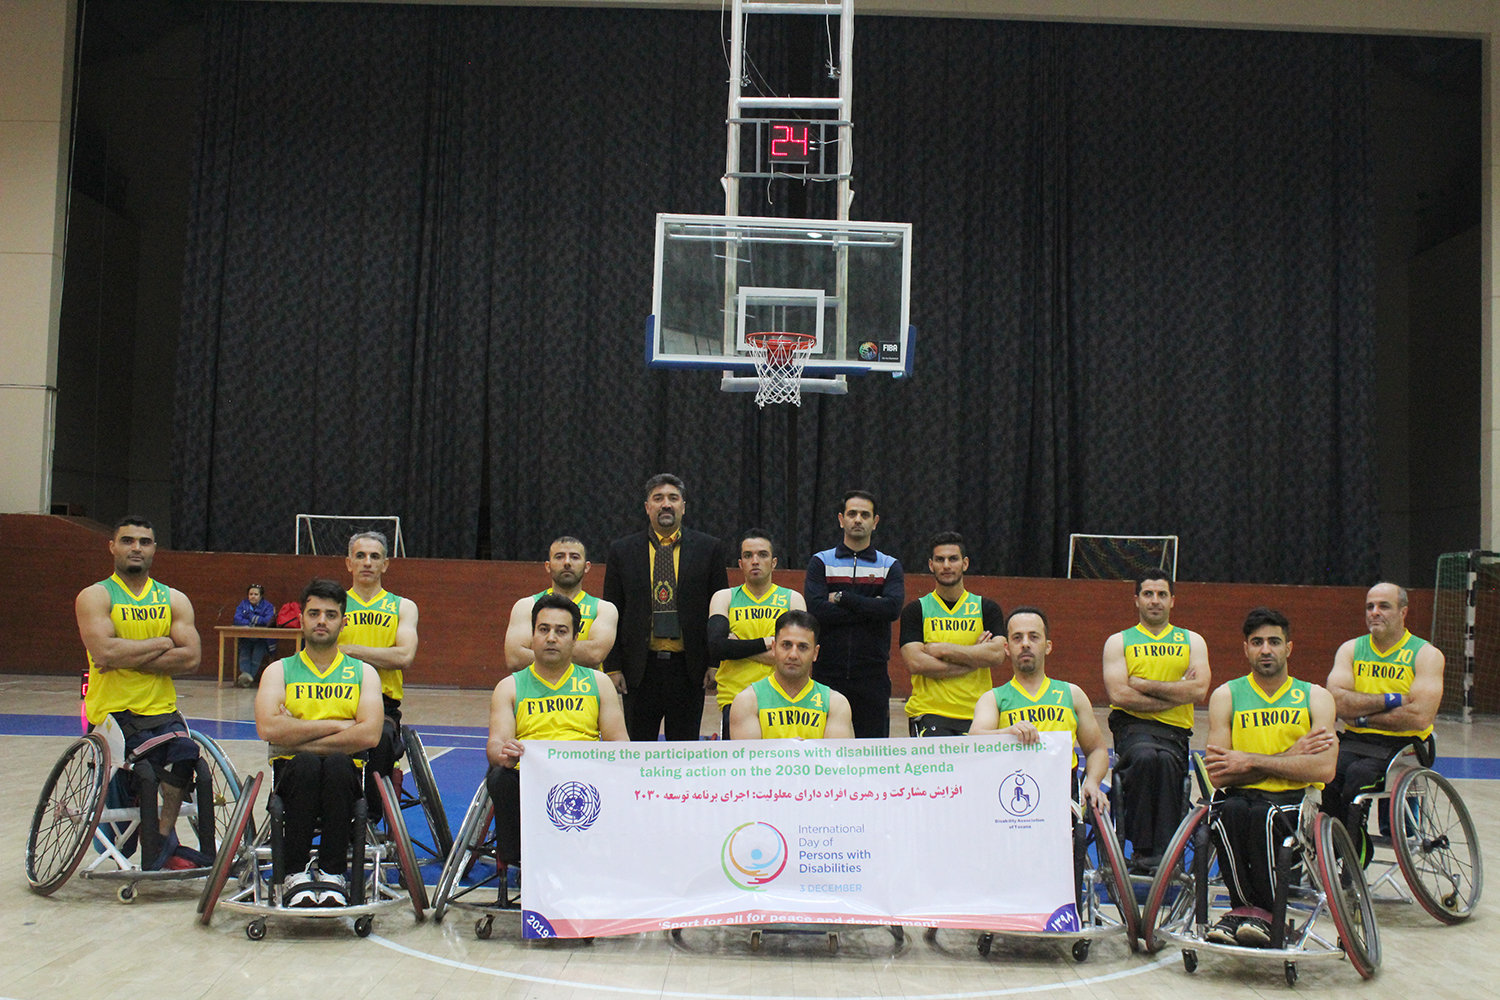 The Wheelchair Basketball team of Firouz grabbed the first position in the Second Wheelchair International Basketball Tournament of Armenia.